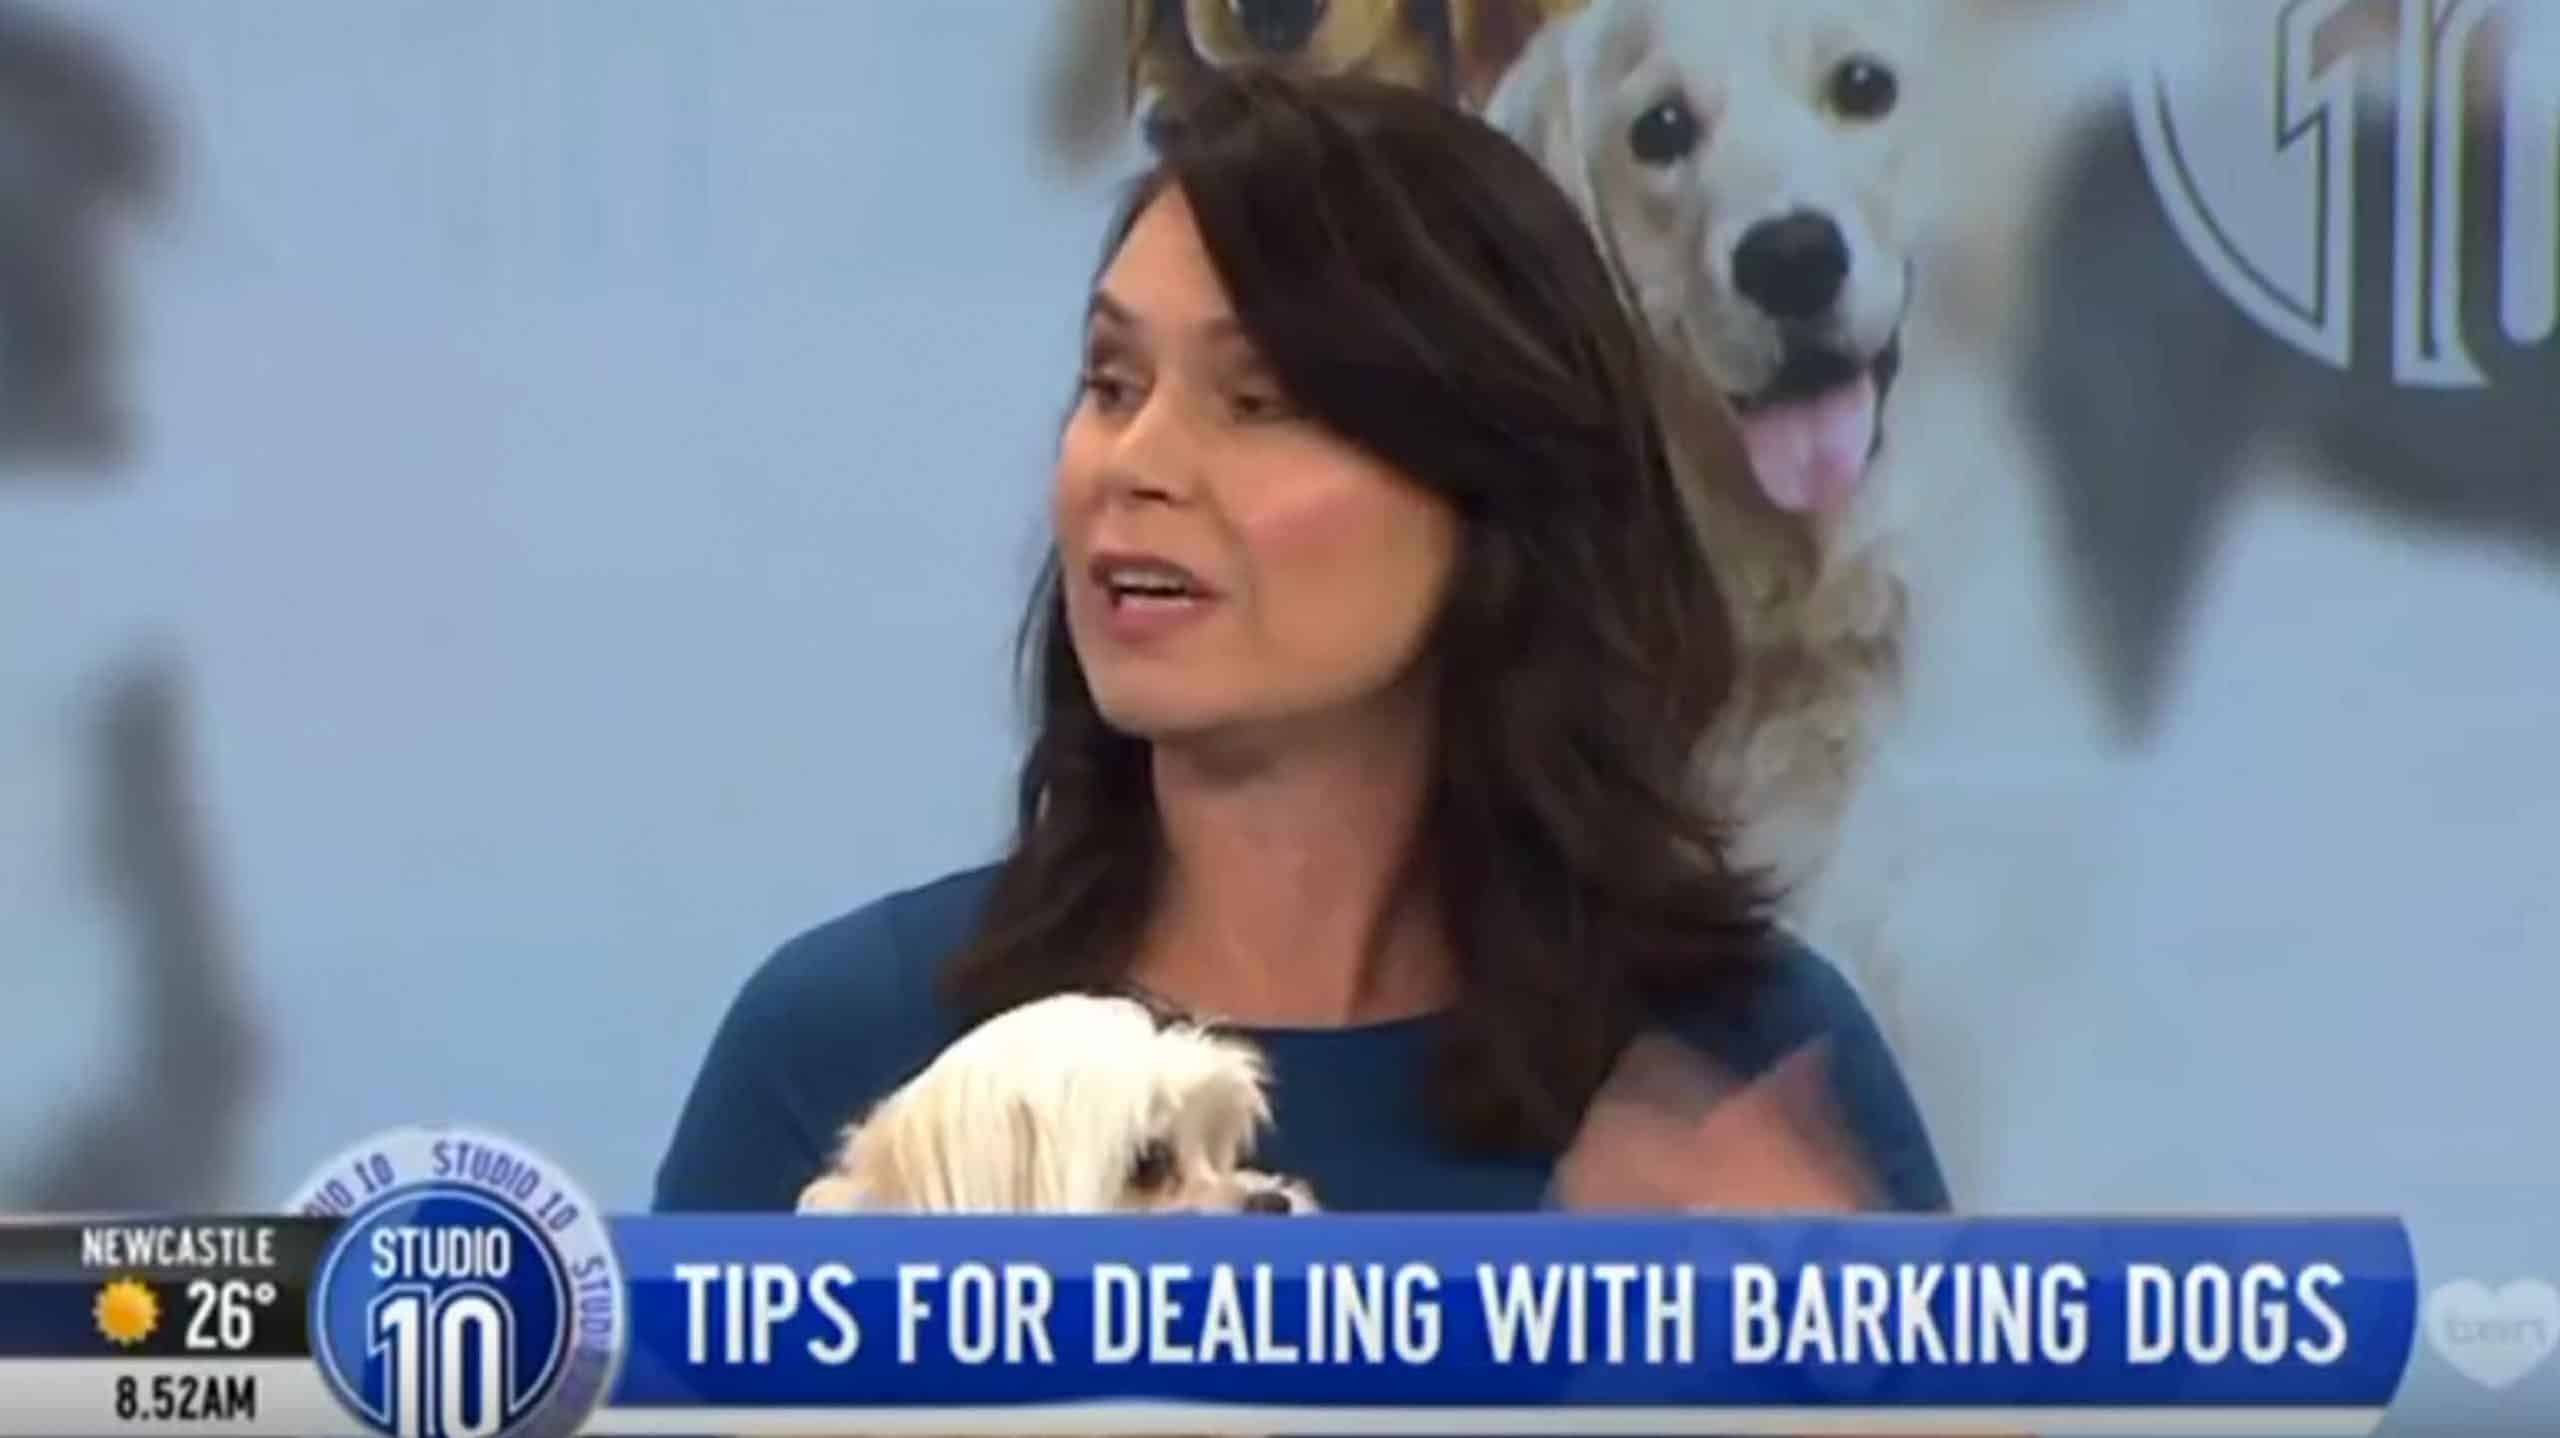 How to help stop dogs barking excessively